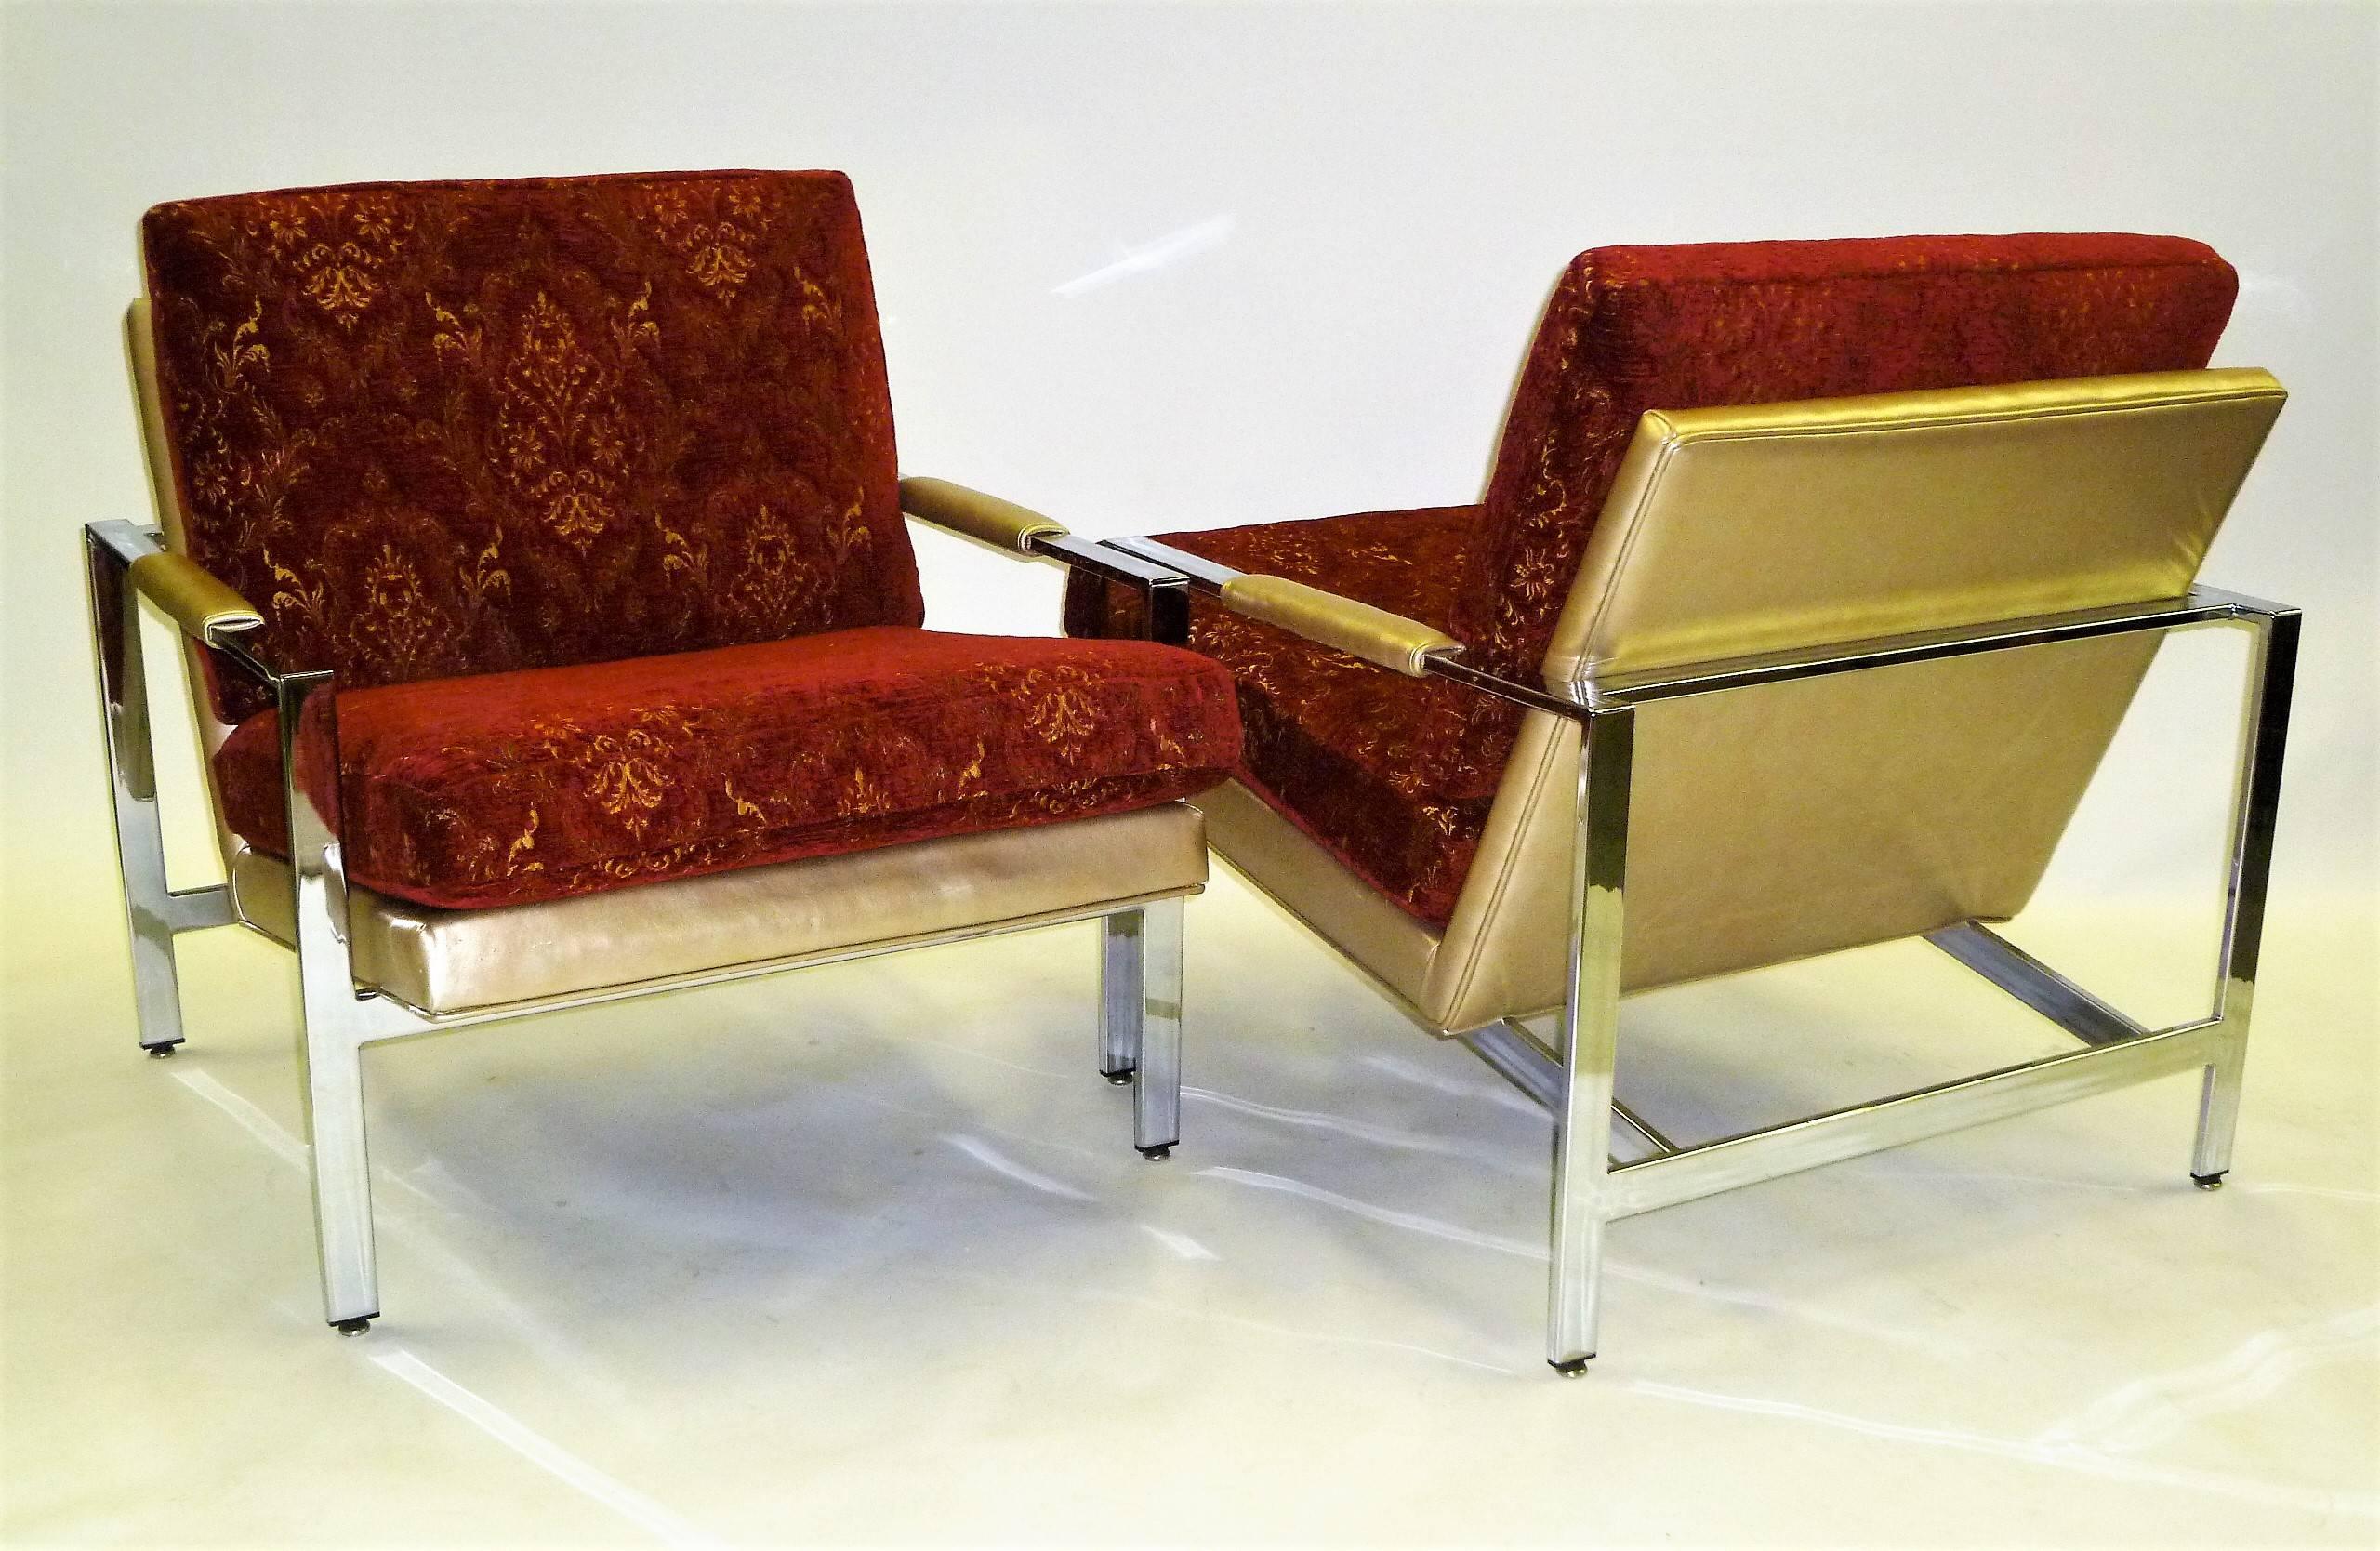 Pair of Milo Baughman's iconic lounge chairs in chrome and sumptuous original goldtone leatherette upholstery with new luxe chenille red and gold thread damask motif cushions. Created by Thayer Coggin, both retain labels. This pair in very good